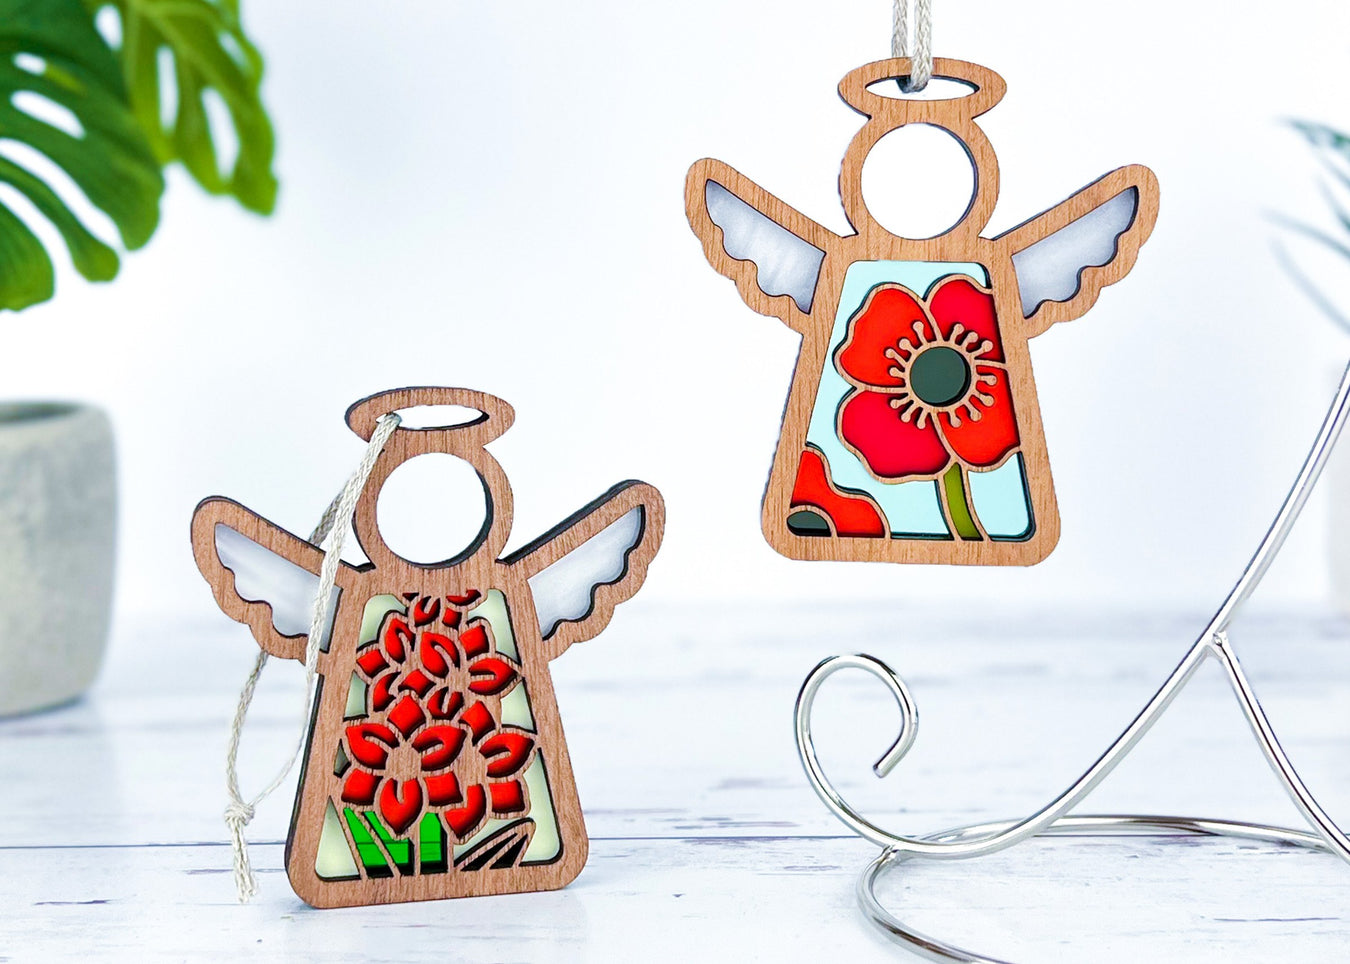 Angel ornaments featuring August birth month flowers, ideal birthday gift ideas for a wife, best friend or special women, showcasing vibrant gladiolus and poppy birth flowers in a stained glass inspired style.